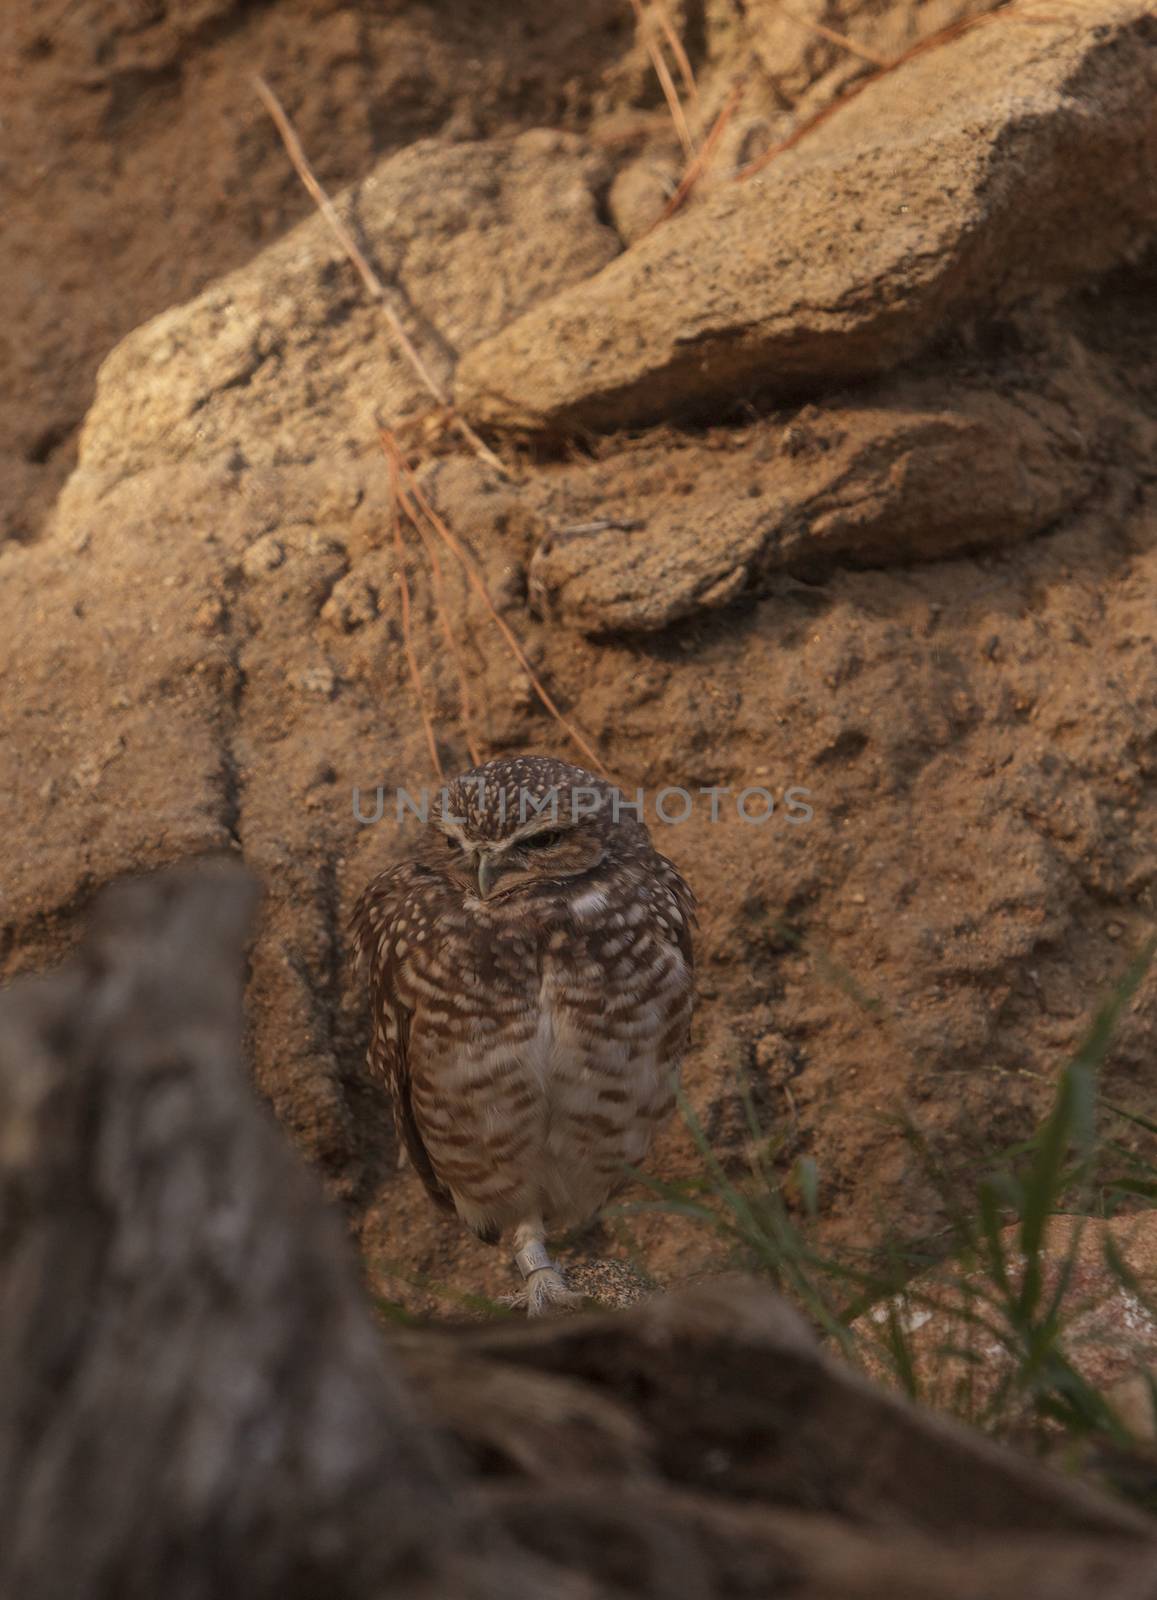 Burrowing Owl, Athene cunicularia, is found in North and South America. They make their home in the ground and are often found in agricultural areas.